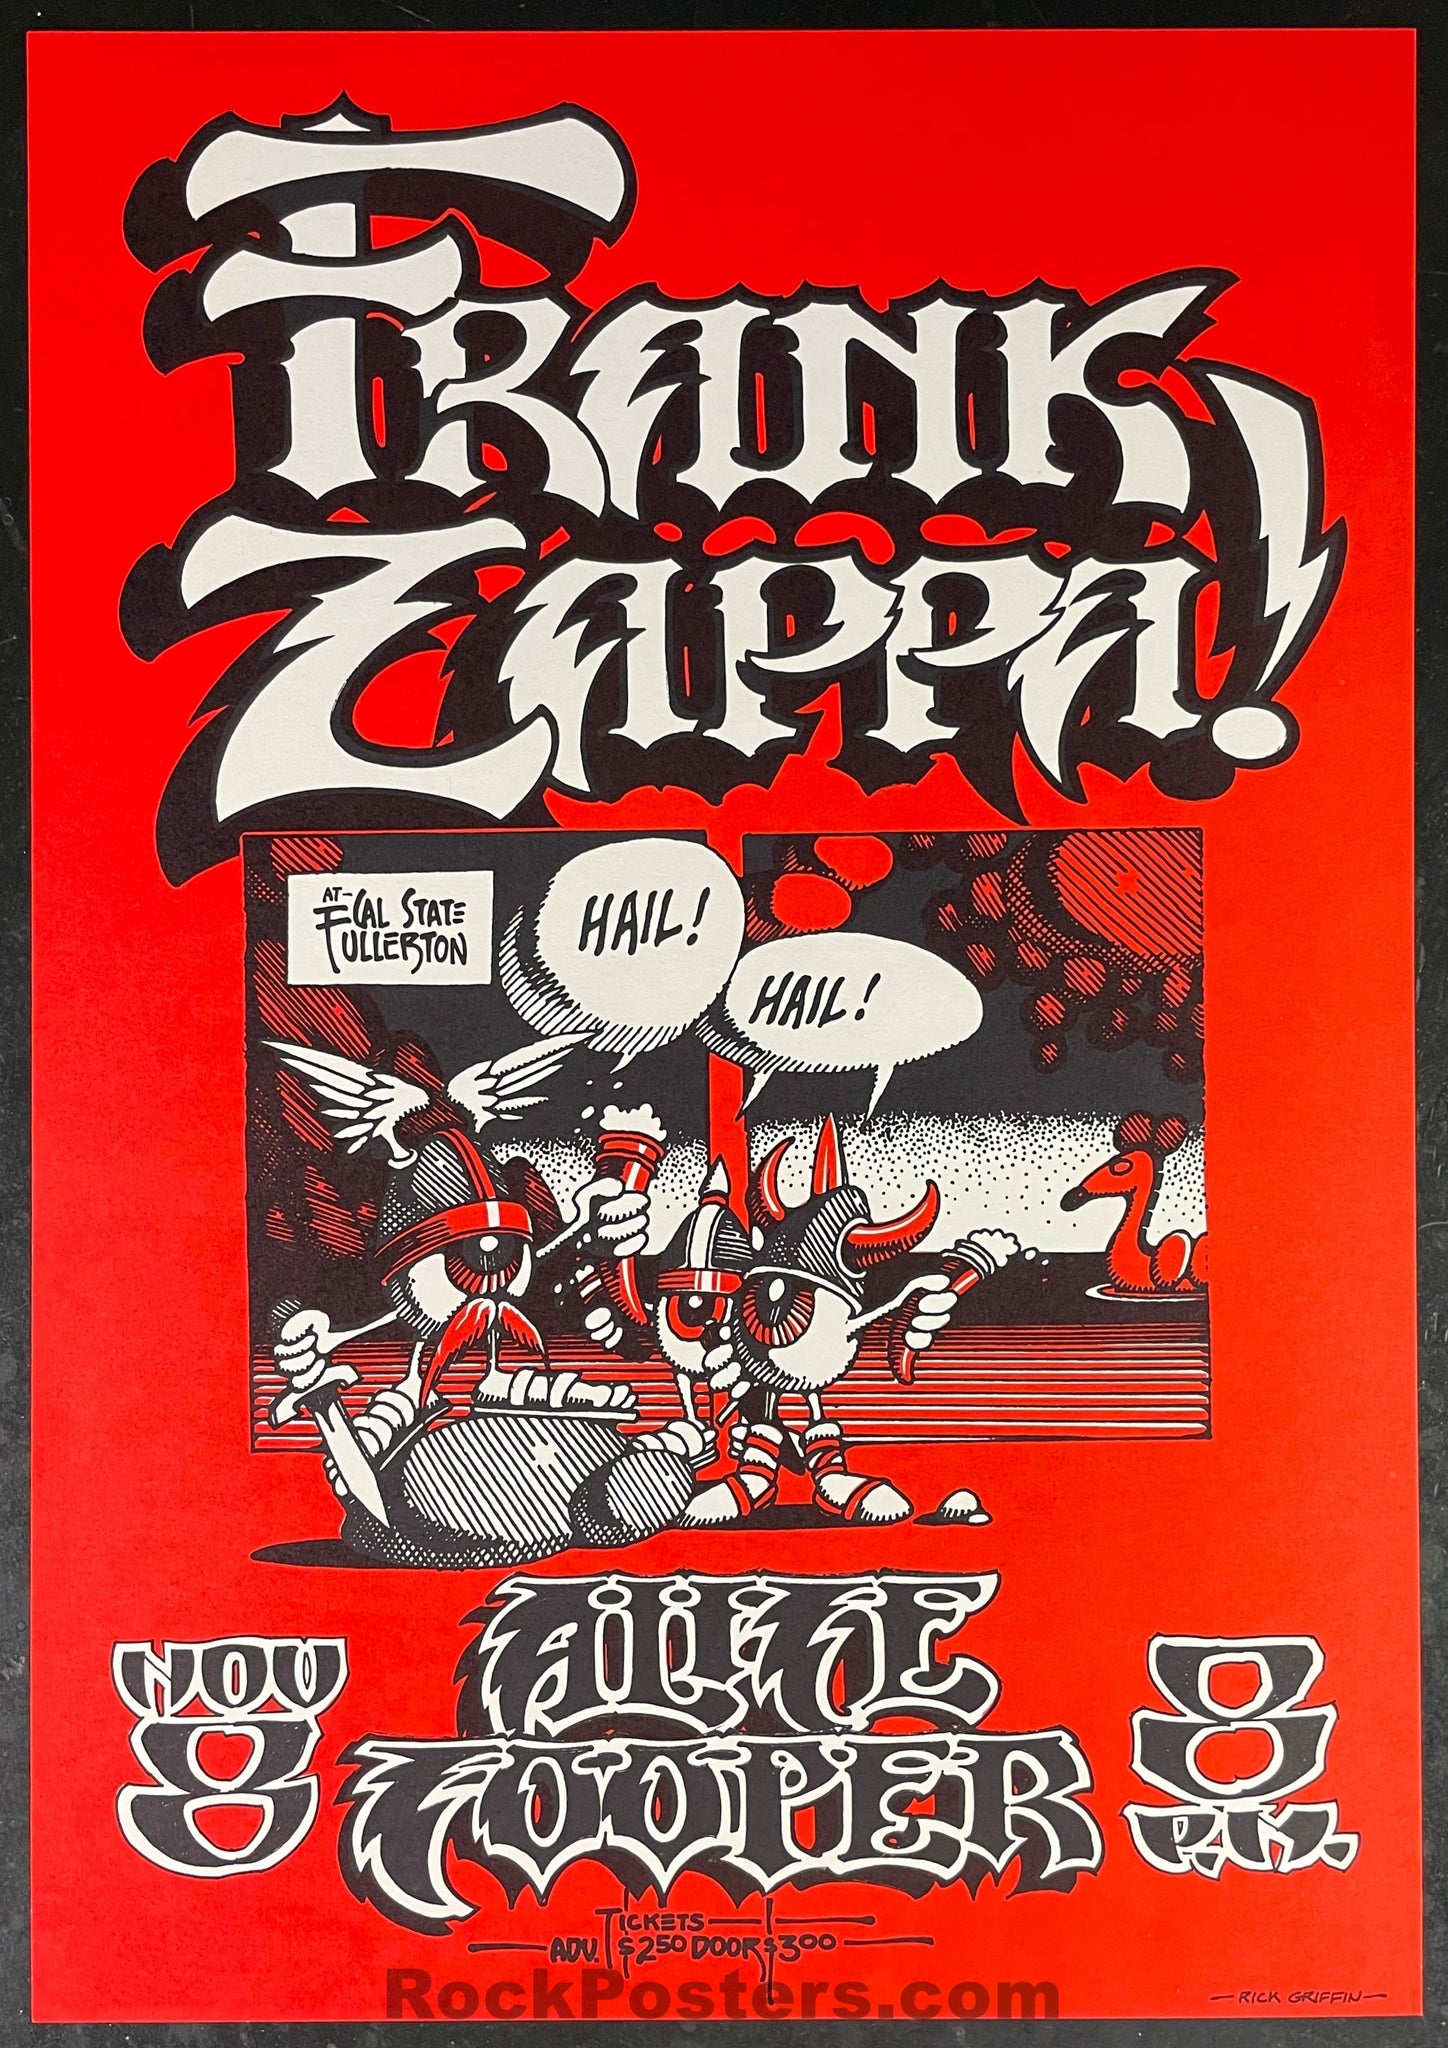 AUCTION - AOR 4.124 - Frank Zappa Alice Cooper - Rick Griffin - 1972 Poster - Near Mint